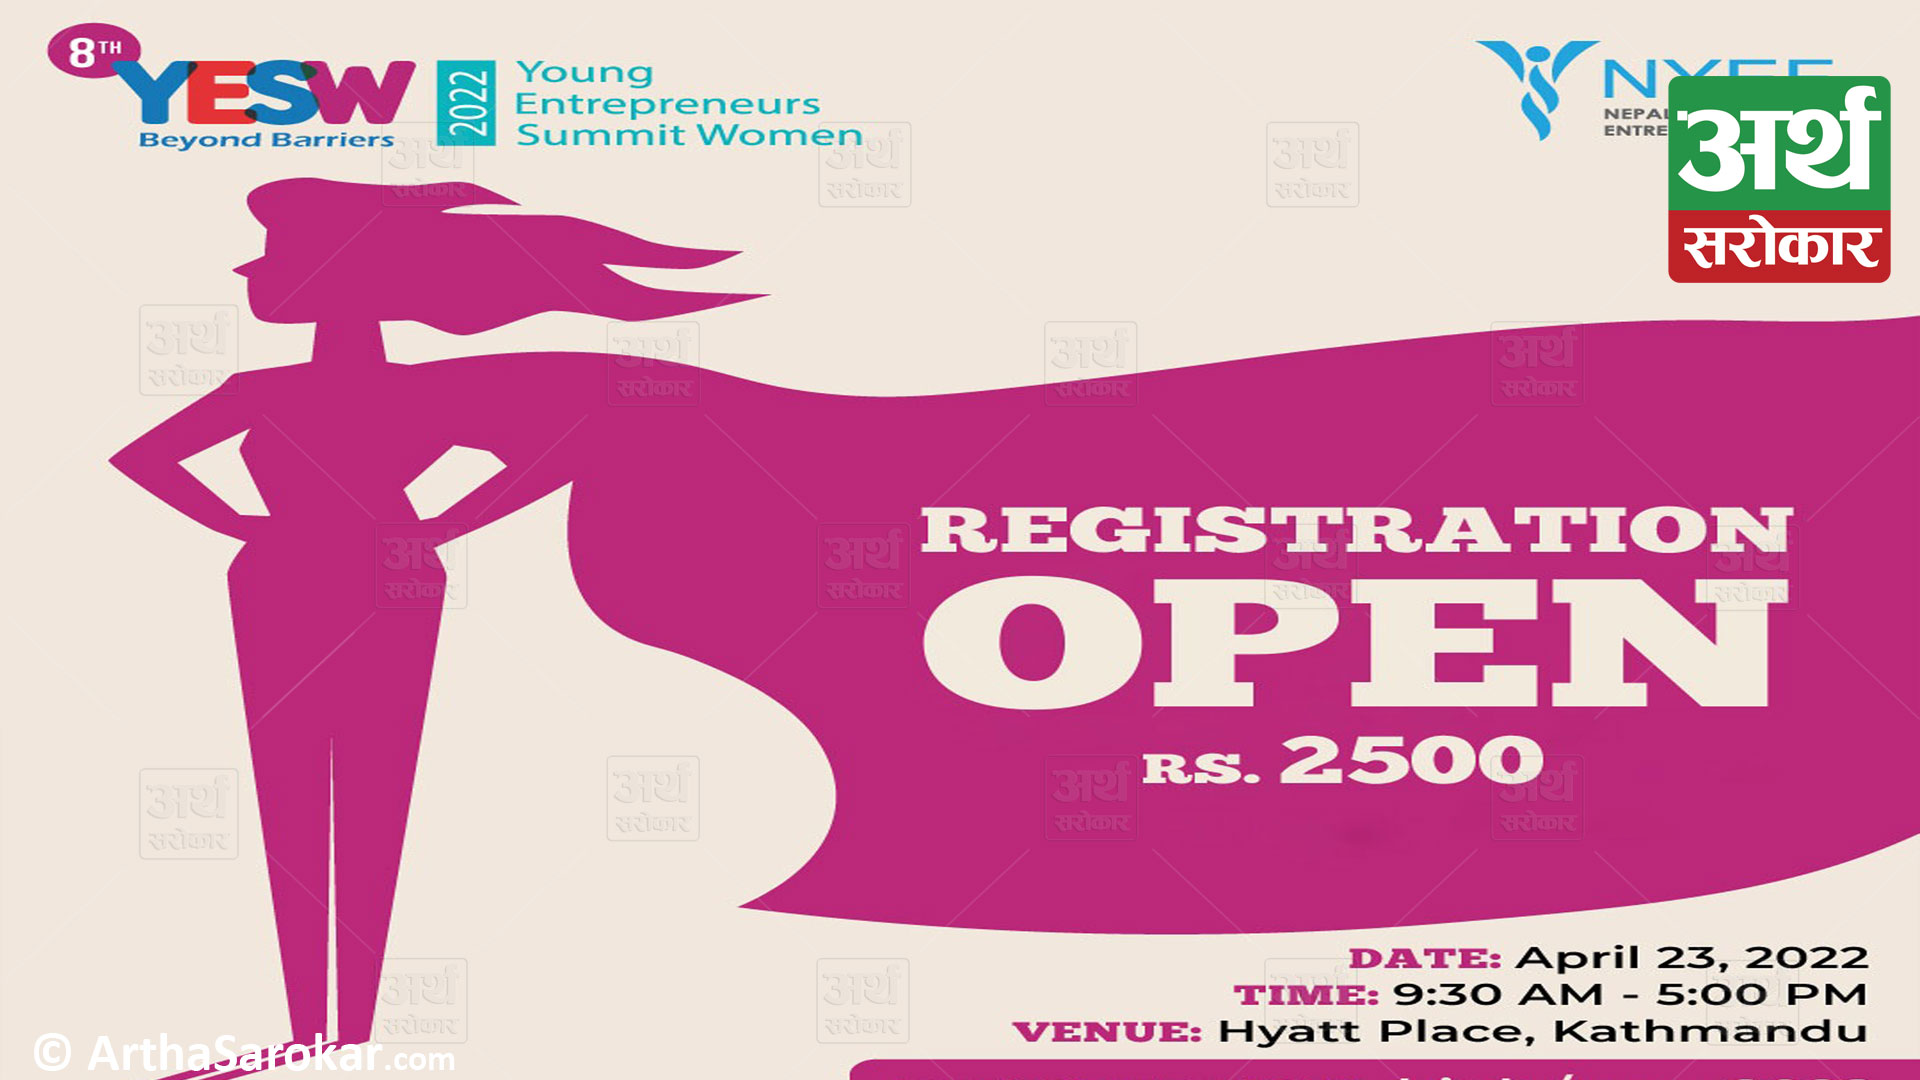 Nepalese Young Entrepreneurs Forum (NYEF) presents the 8th Young Entrepreneurs Summit Women (YESW) 2022